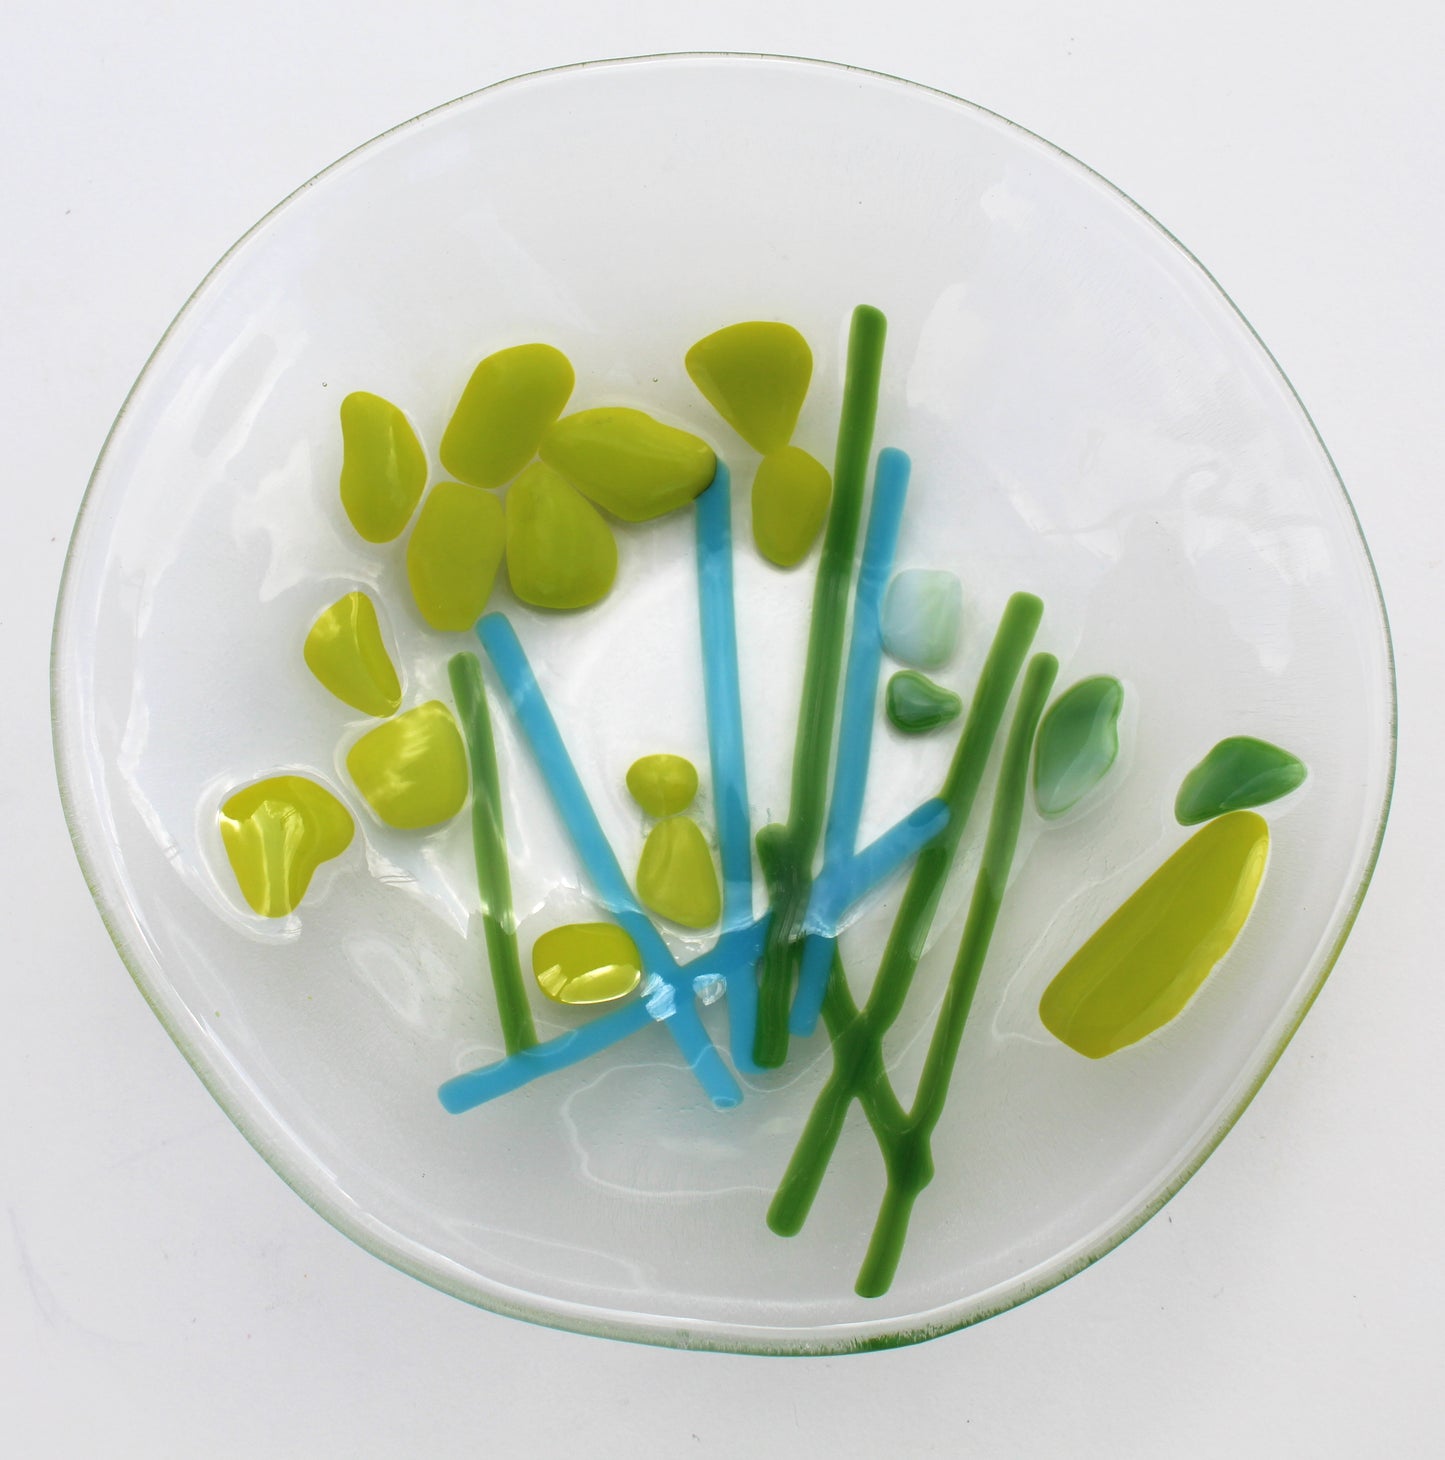 This is a fused glass piece that is clear with blue and green lines resembling stems, and lime green blotches resembling flowers.